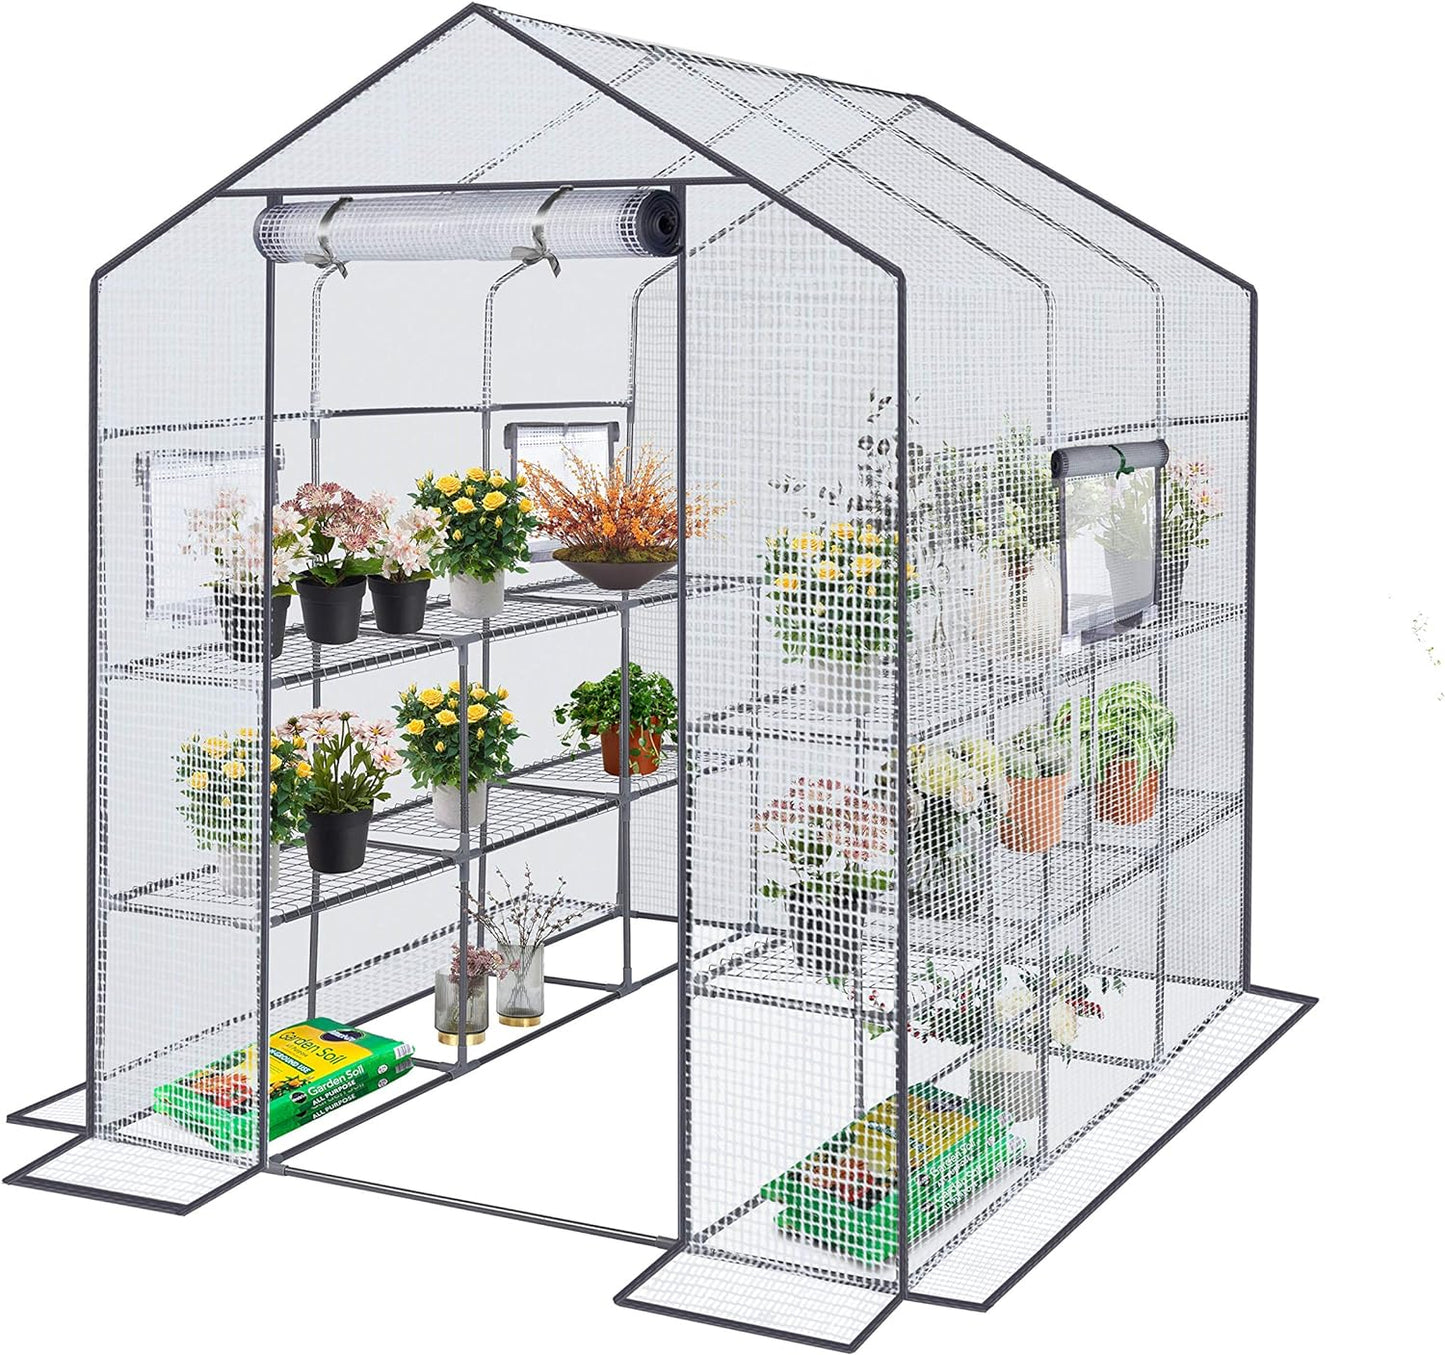 Reinforced Walk-In Greenhouse with Window,Plant Gardening Green House 2 Tiers and 12 Shelves,L57 X W80 X H77